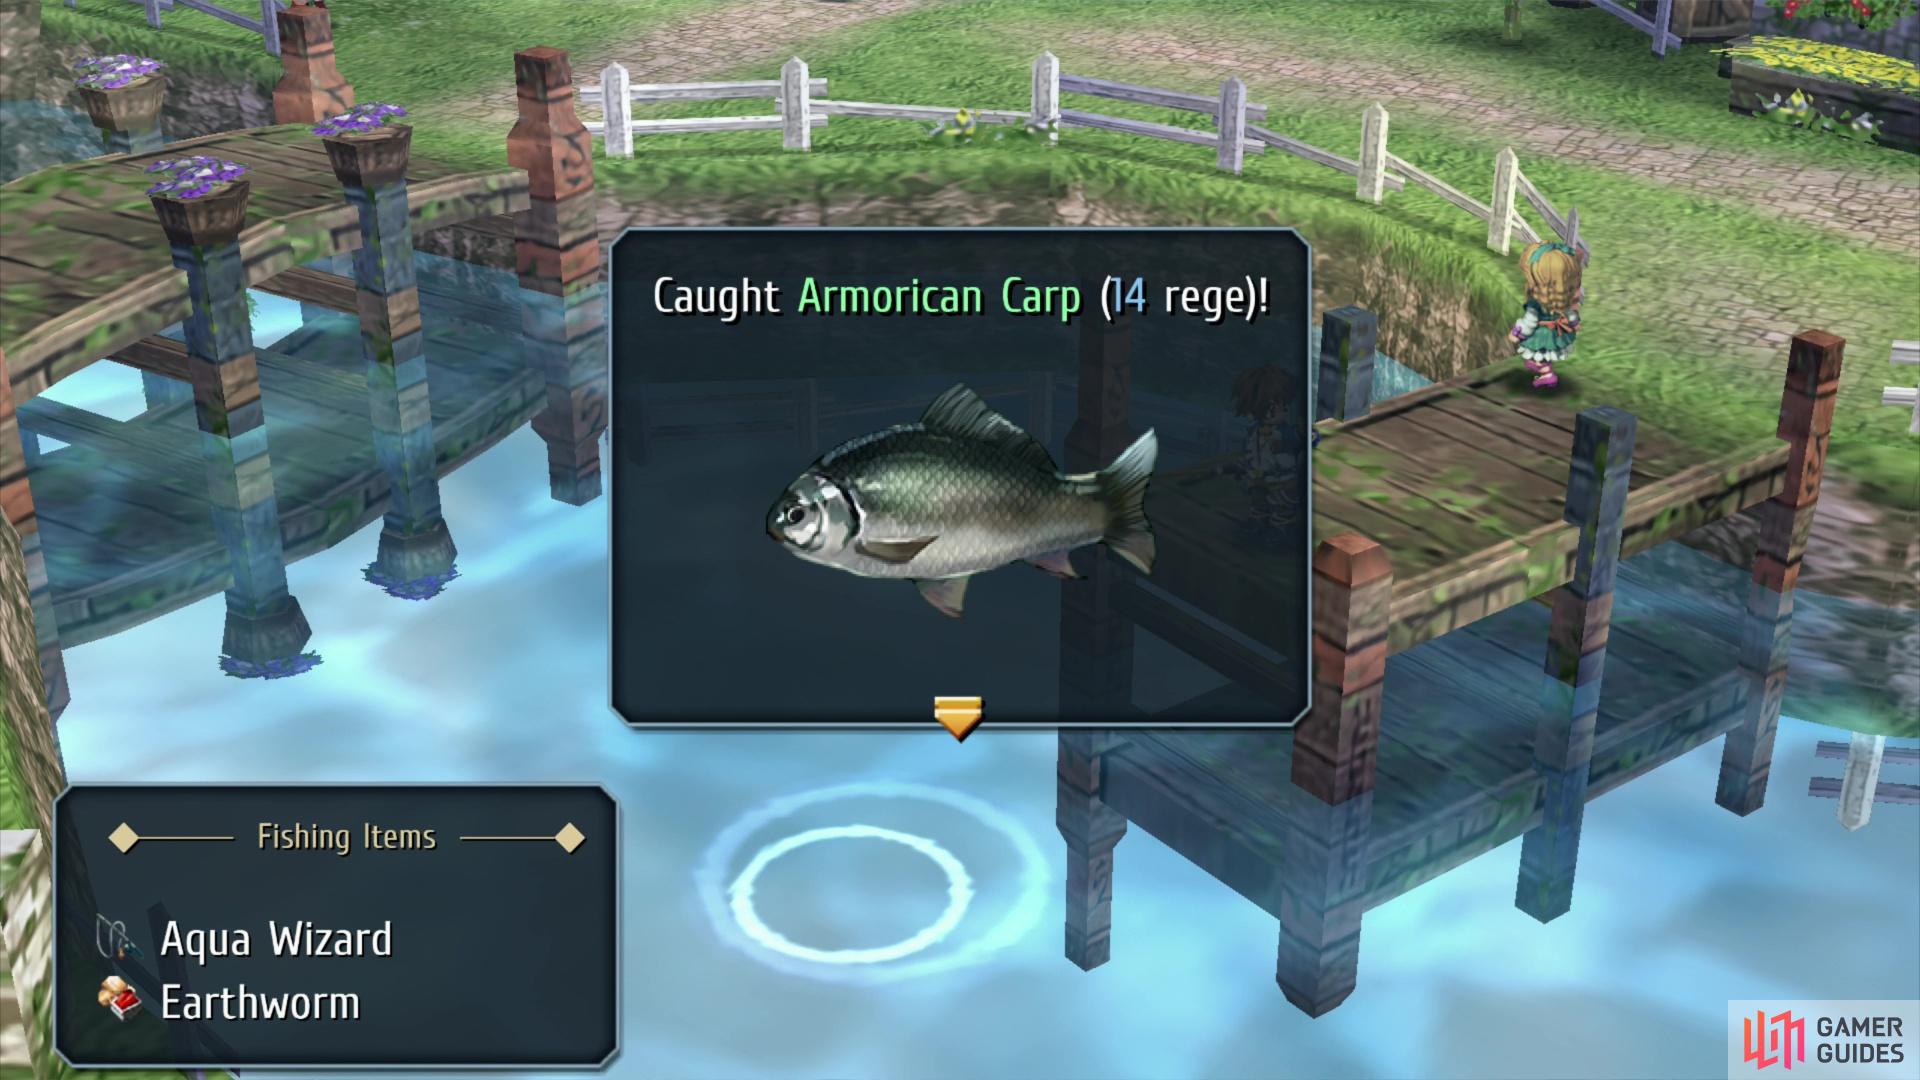 At the Armorica Village fishing spot you can catch the Armorican Carp,